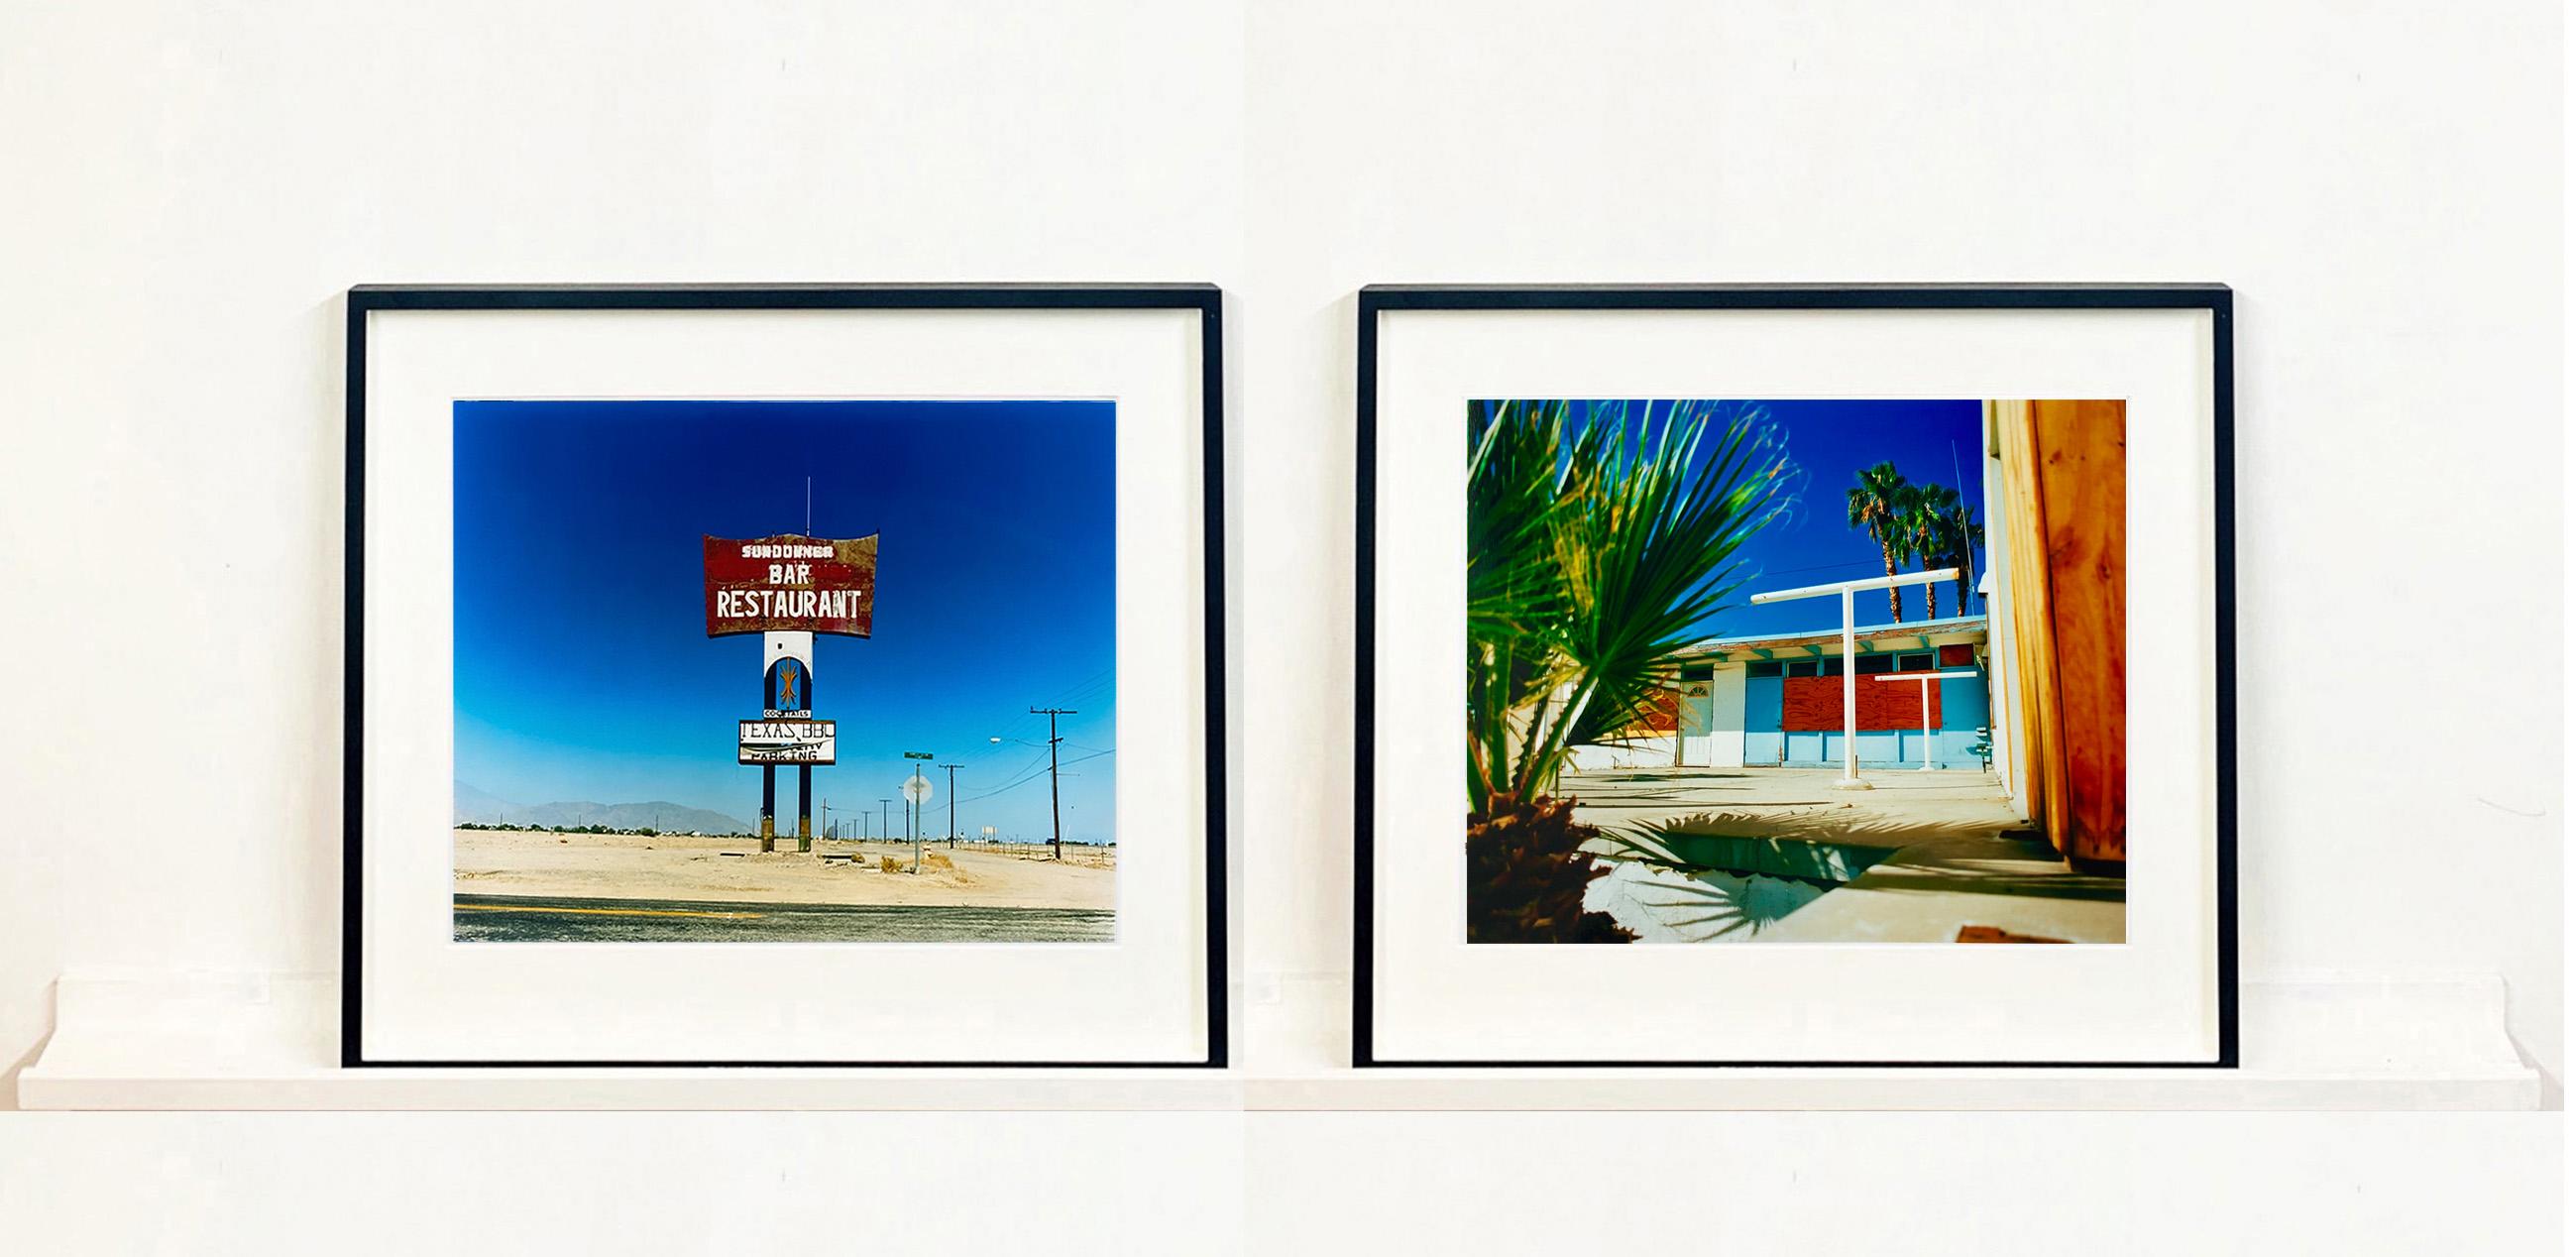 Sundowner, this isolated giant great roadside sign set against a vast blue sky is a remnant of The Sundowner Bar and Restaurant of the Motel which is unfortunately no more. This photograph, part of Richard Heeps Salton Sea Series captures the